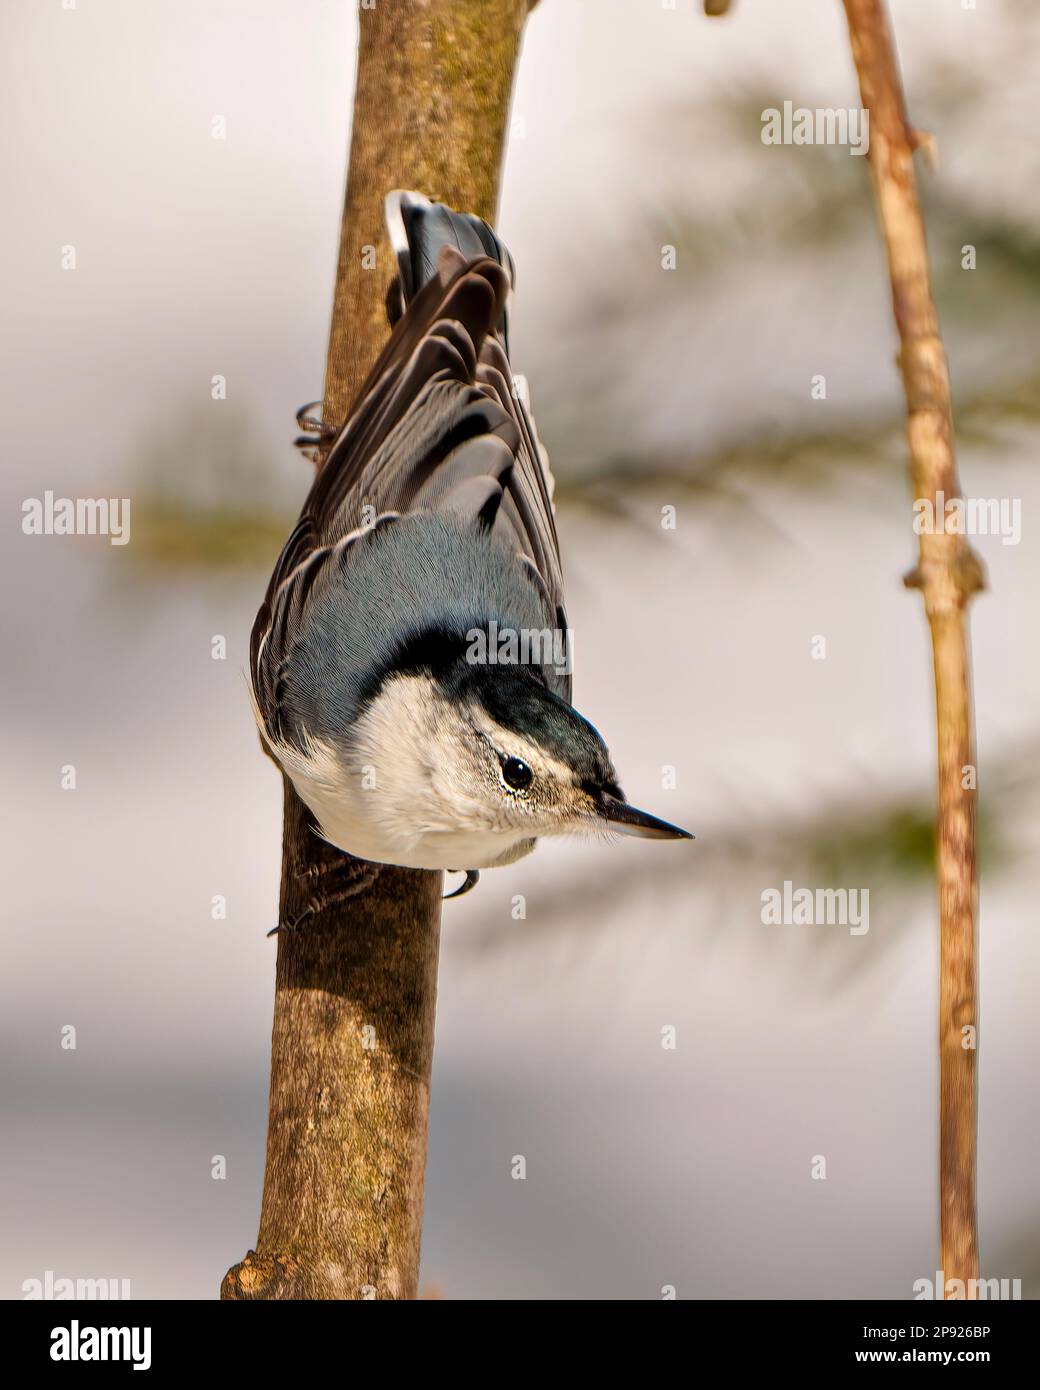 White-breasted Nuthatch rear view clinging on a tree branch looking down in its environment and habitat surrounding with a blur background. Nuthatch Stock Photo